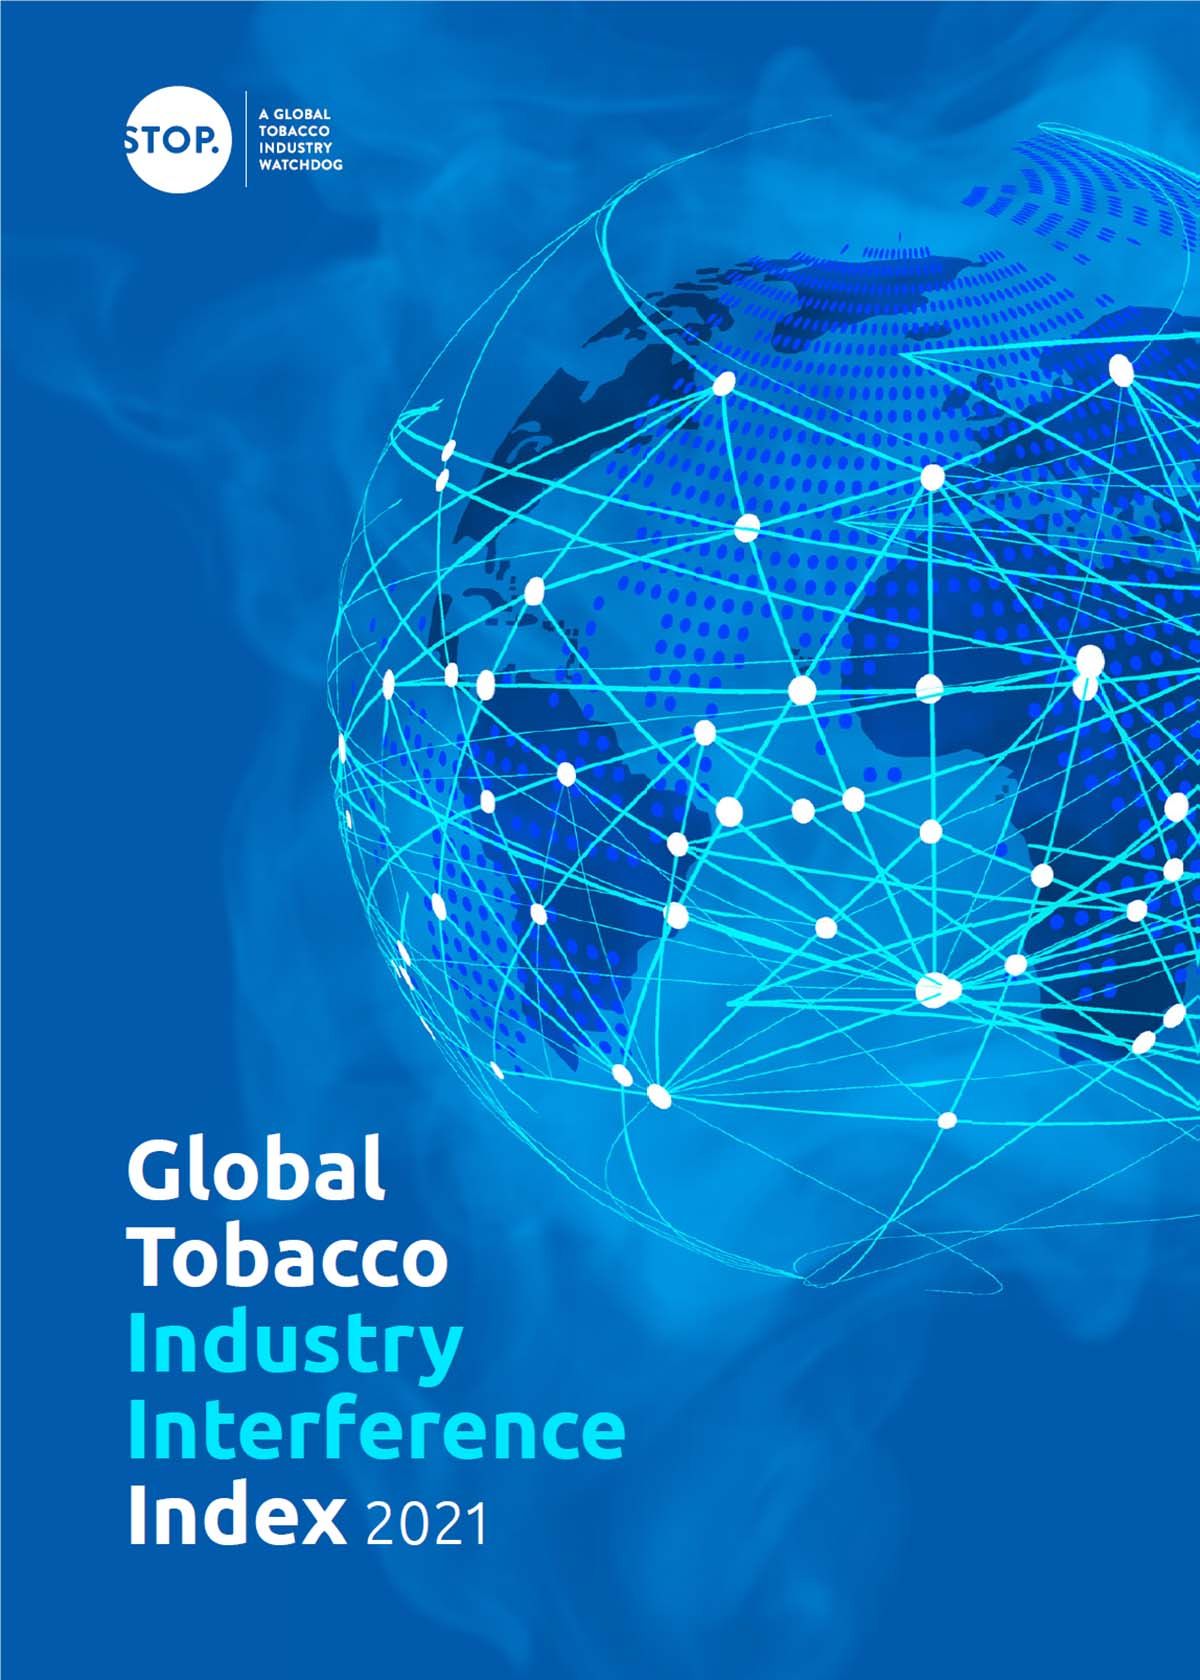 Raport Global Tobacco Interferences Index 2021